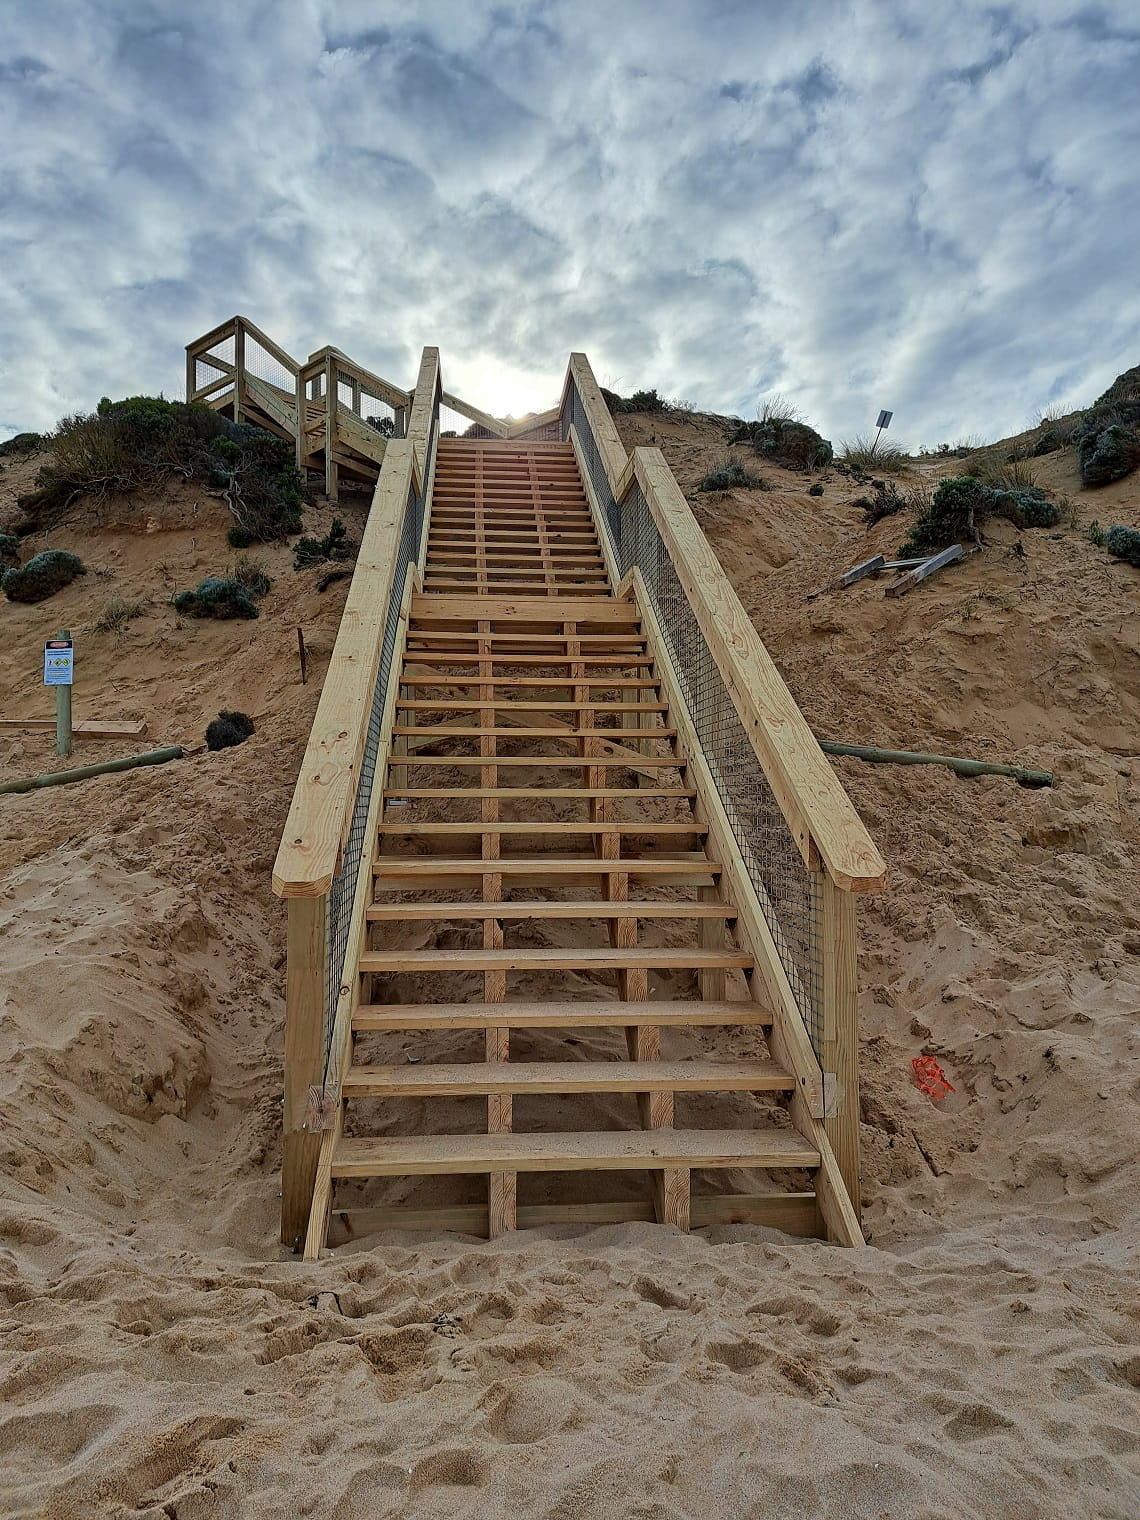 A portrait photo of the new stairs at Number 16 Beach. The photo is taken from the bottom of the stairs, looking up from the beach to the top of the stairs, which leads to grassy sand dunes. 